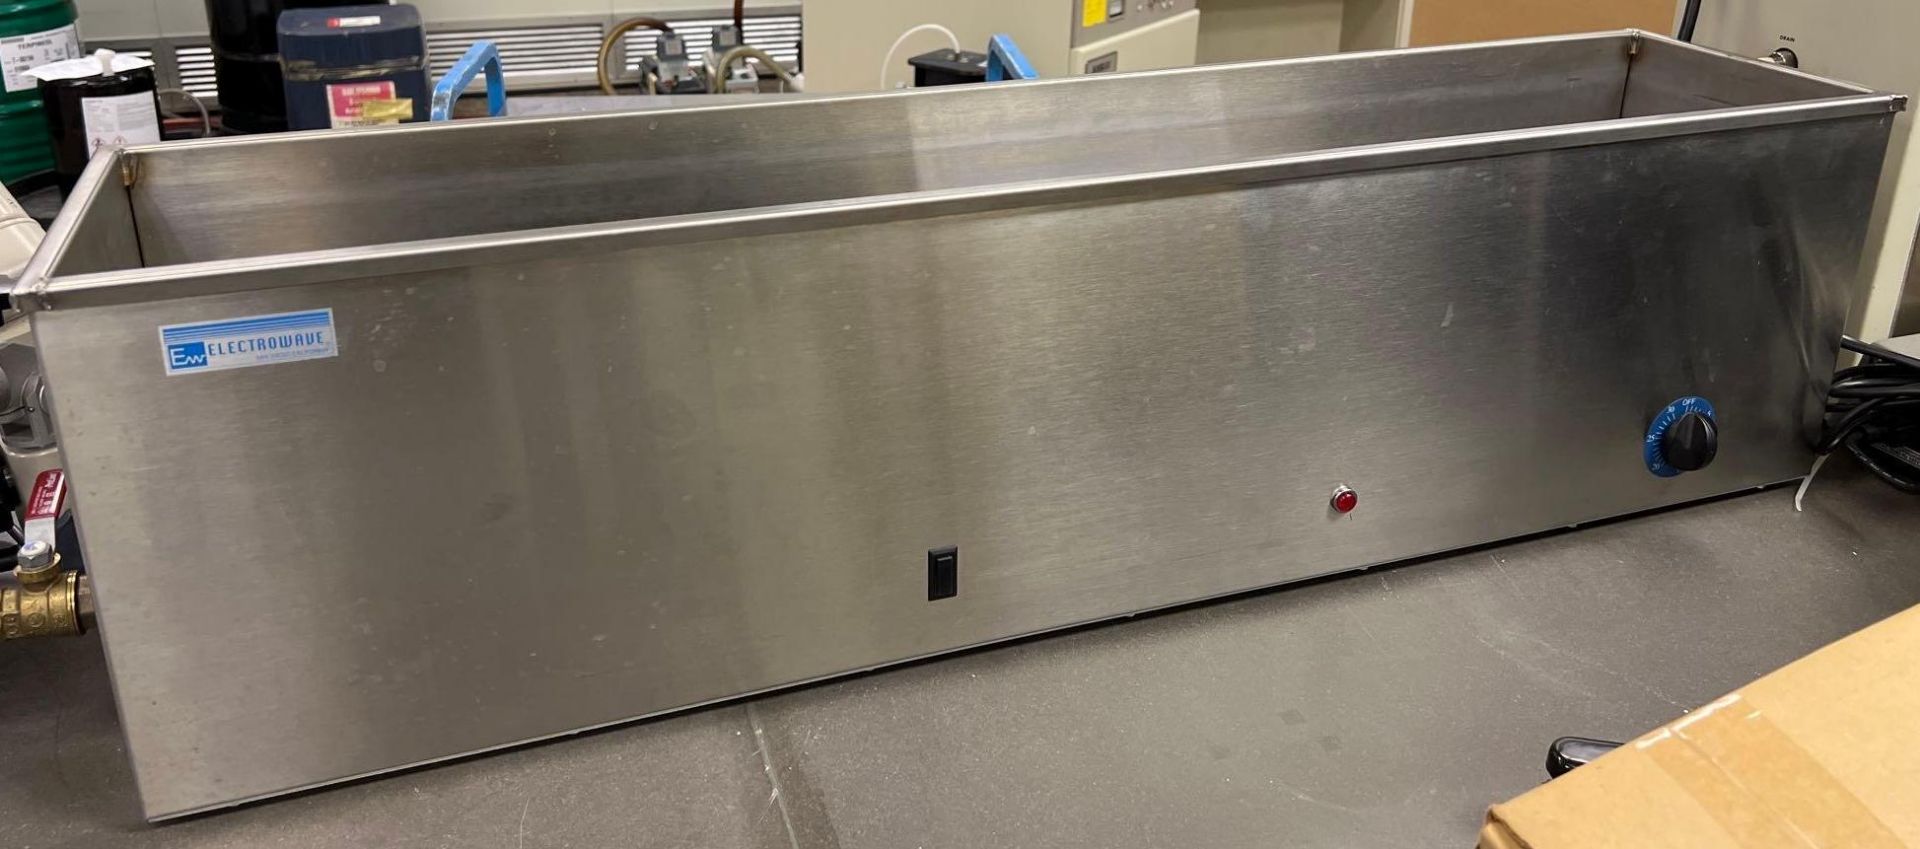 Electrowave Ultrasonic Cleaning System, Model # EW-40t - Image 3 of 4